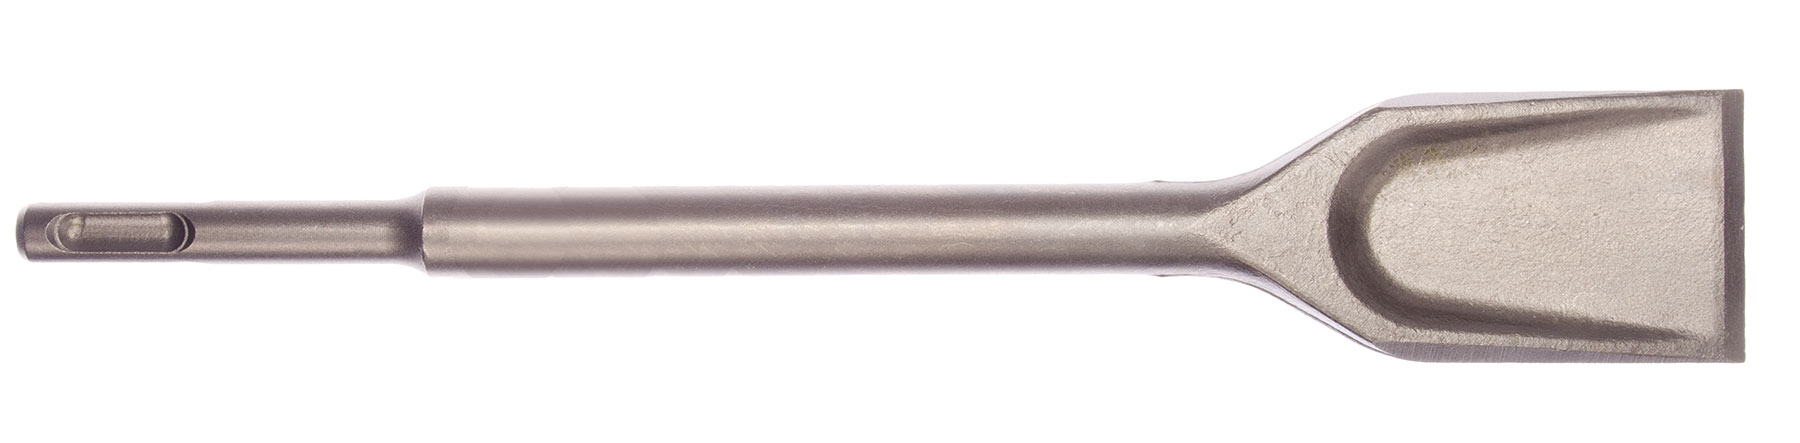 PROFESSIONAL Spade chisel with SDS-plus shank